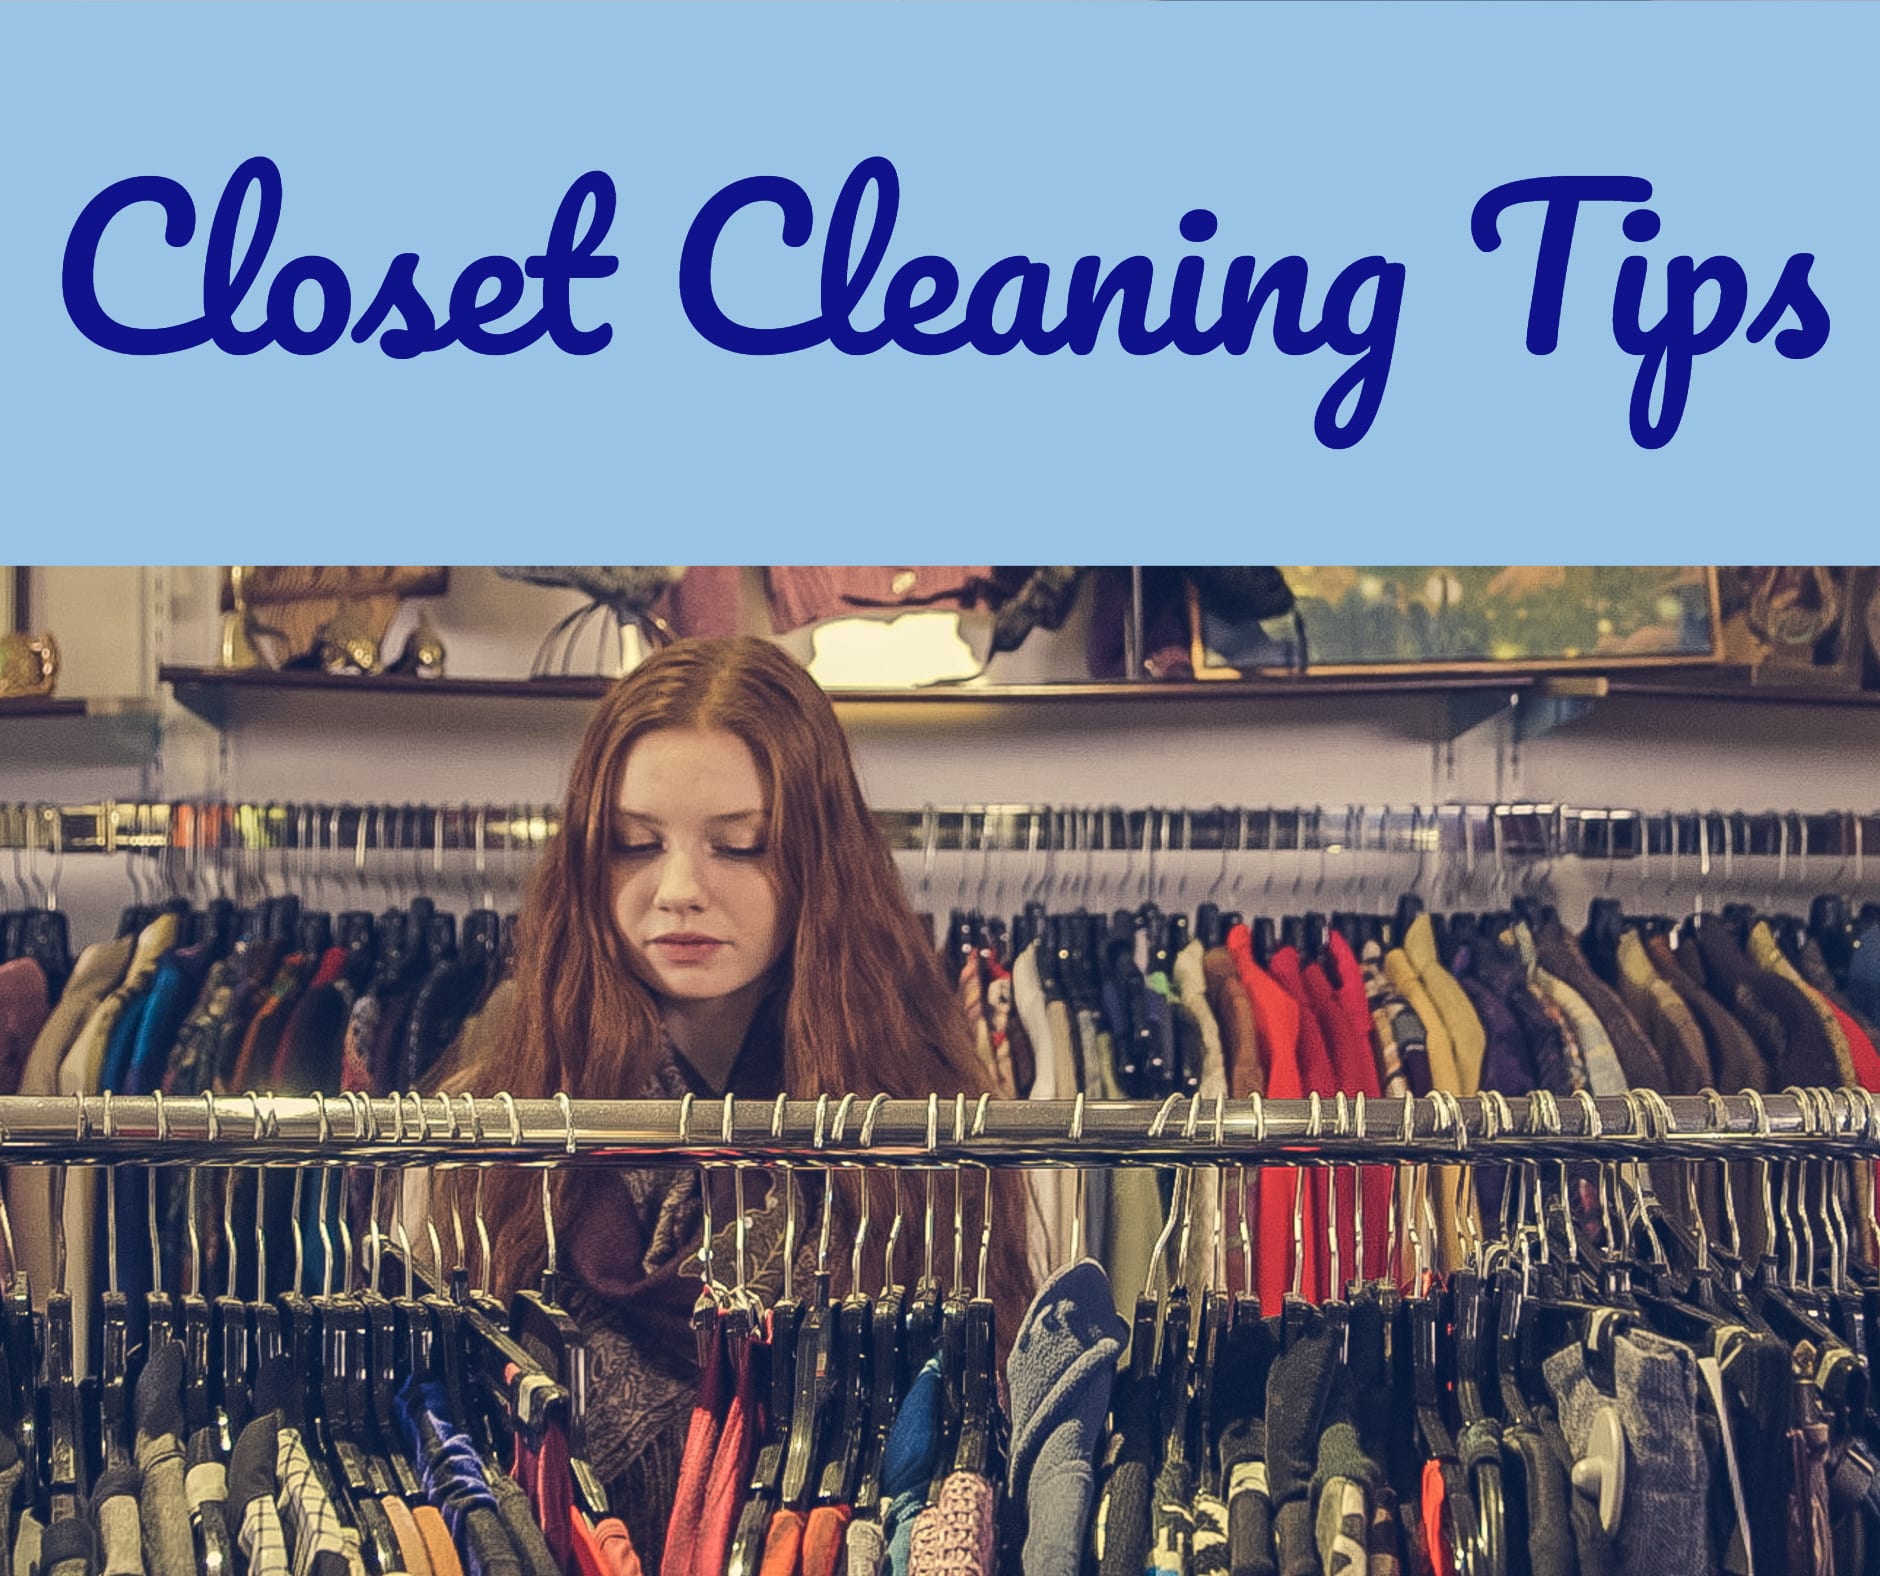 Closet Cleaning Tips from a Maid Service